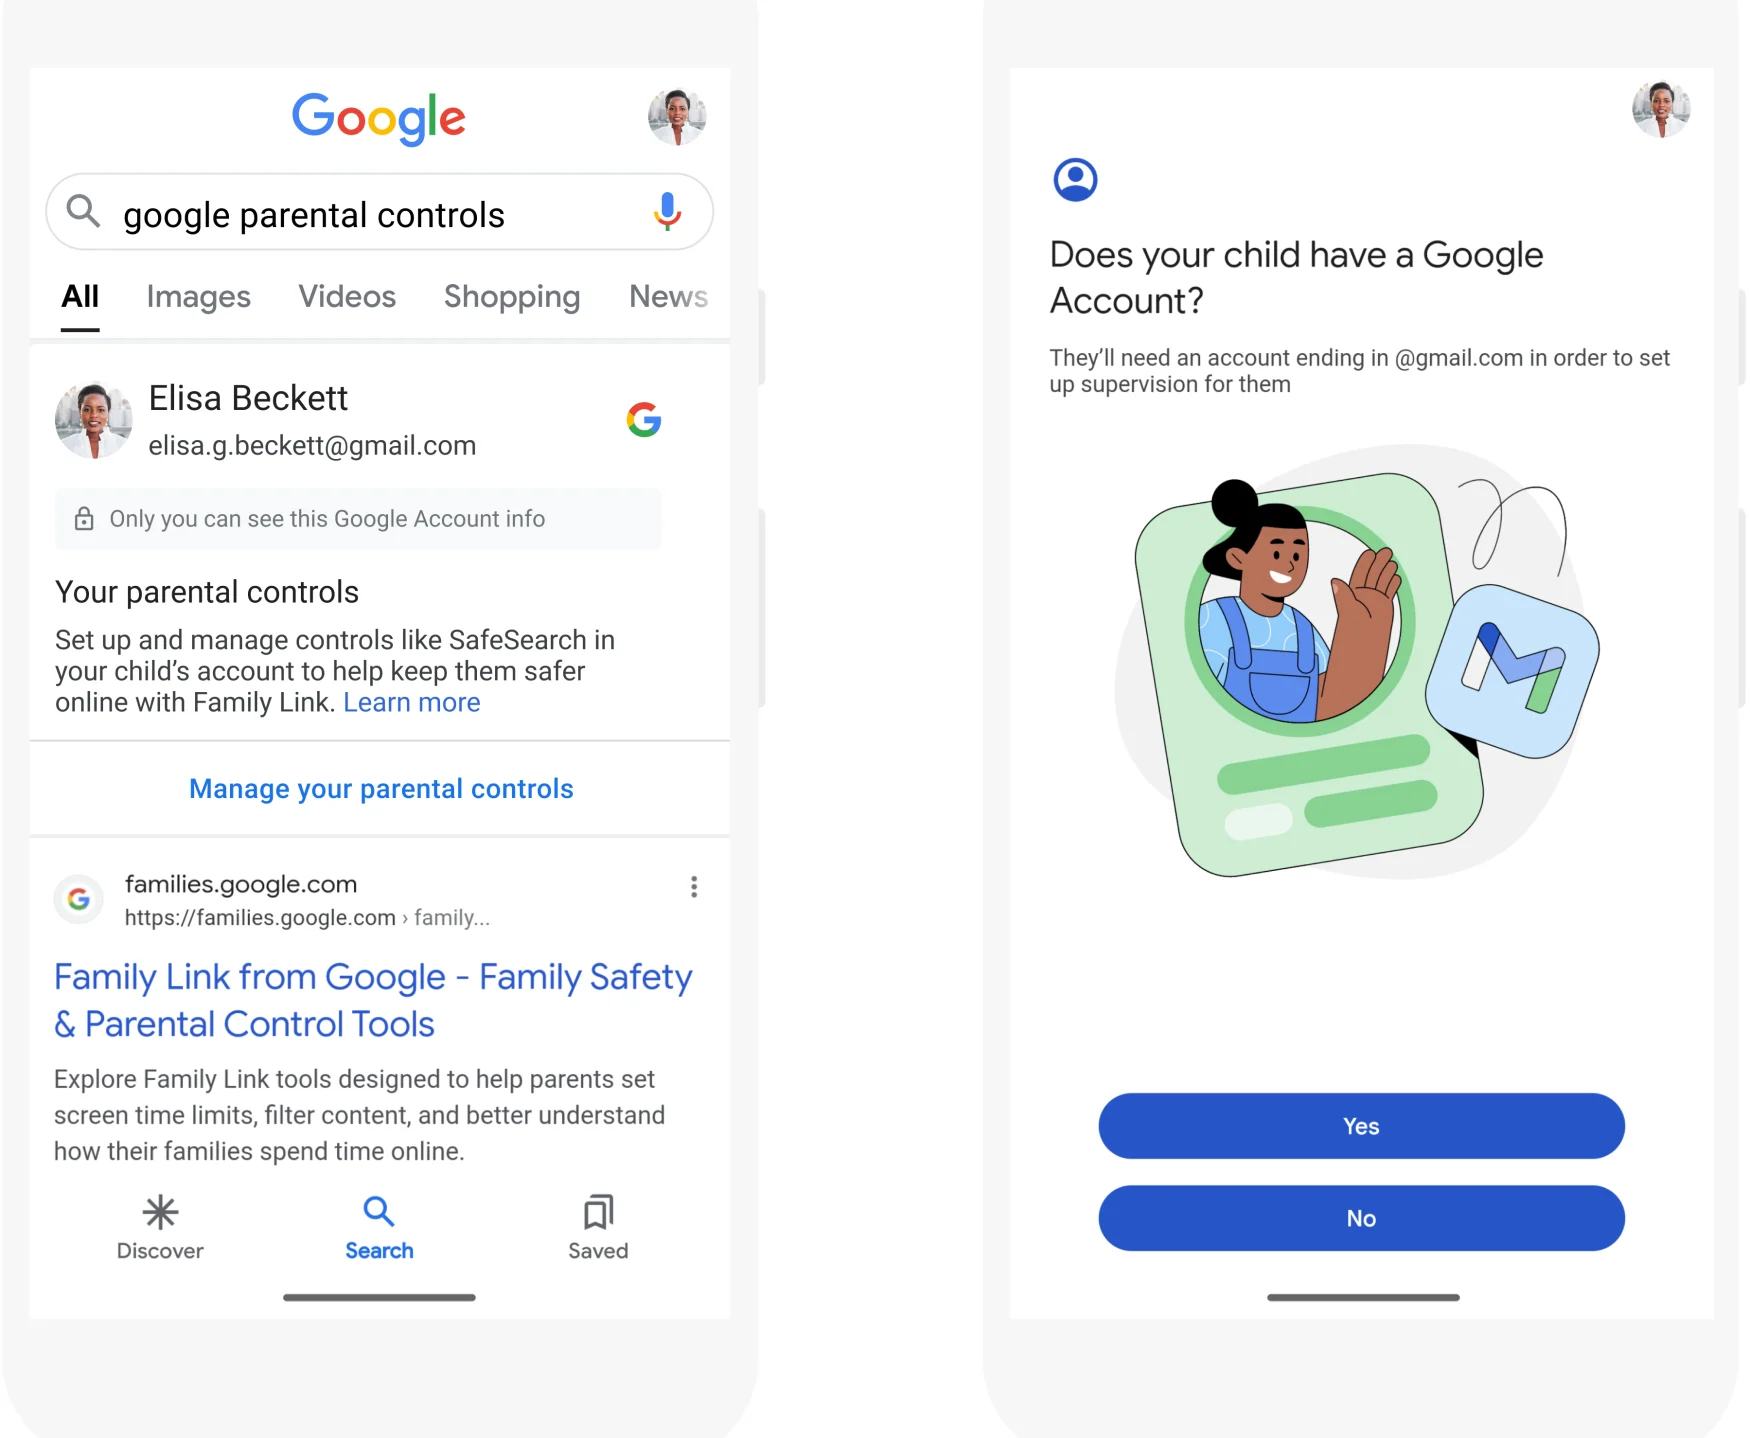 Screenshots showing how to access Google's parental controls from Search. The first shows the query 